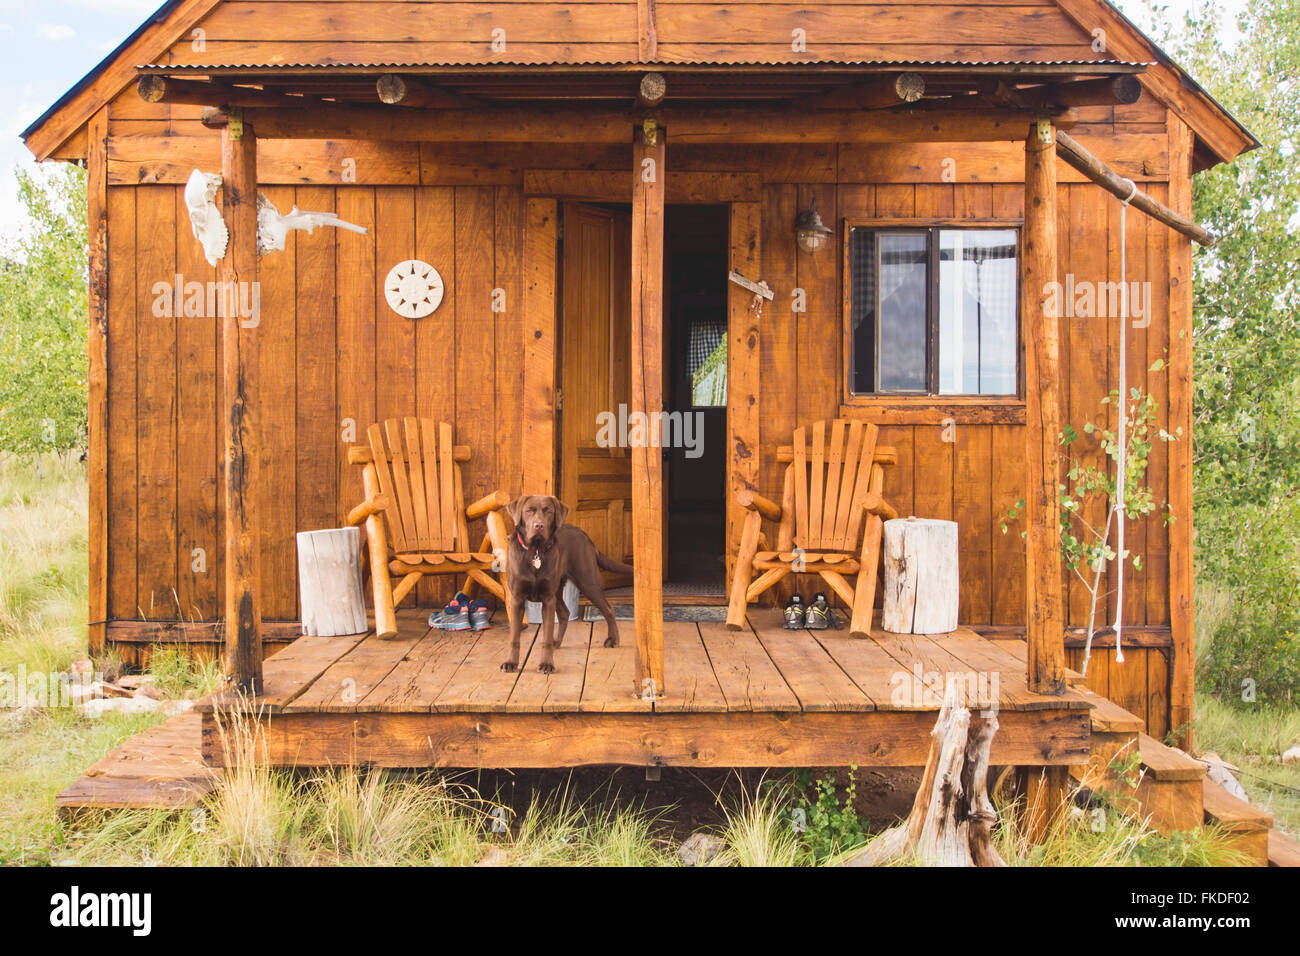 Dog on porch of wooden hut Stock Photo